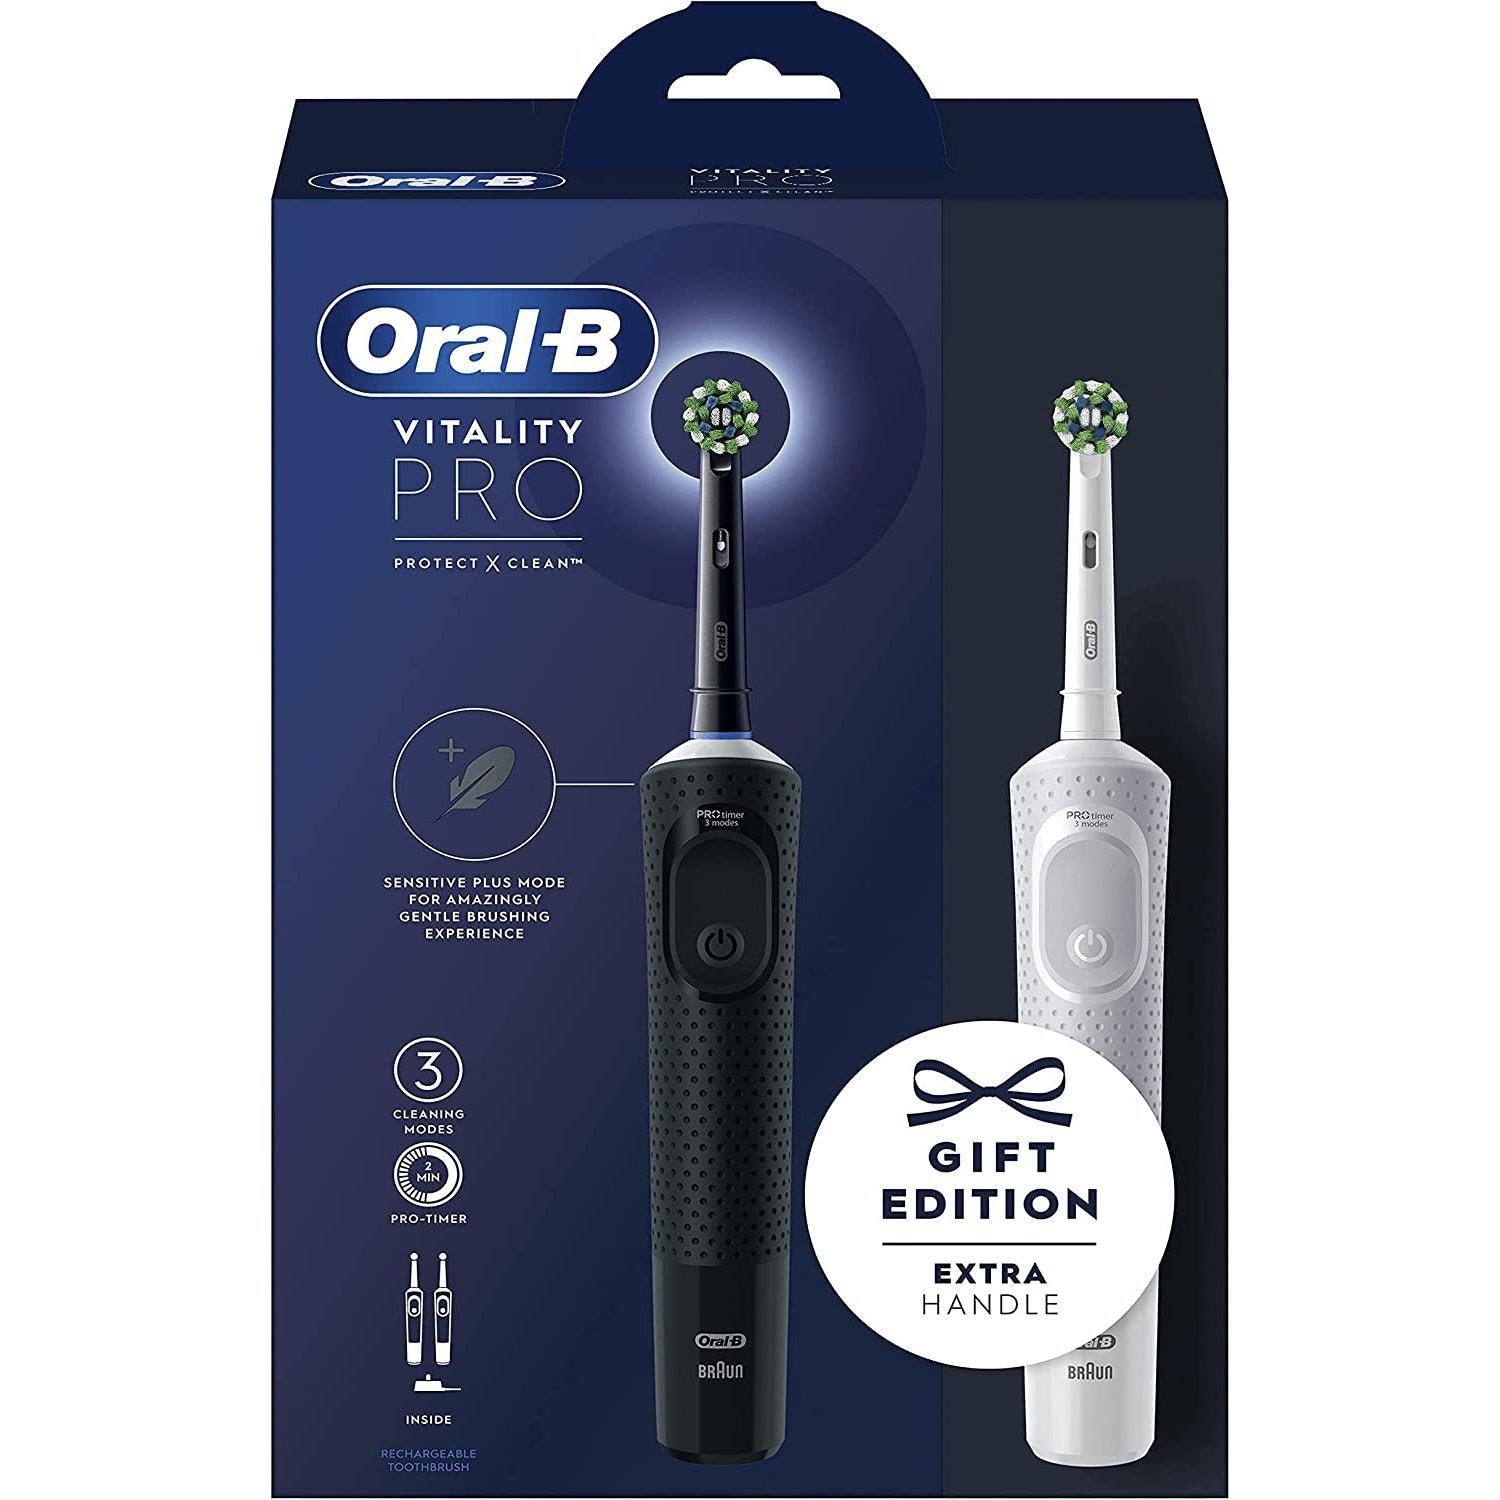 Oral-B Vitality Pro 2 x Electric Toothbrushes, 2 Toothbrush Heads, 3 Brushing Modes Including Sensitive Plus - Black & White - Healthxpress.ie